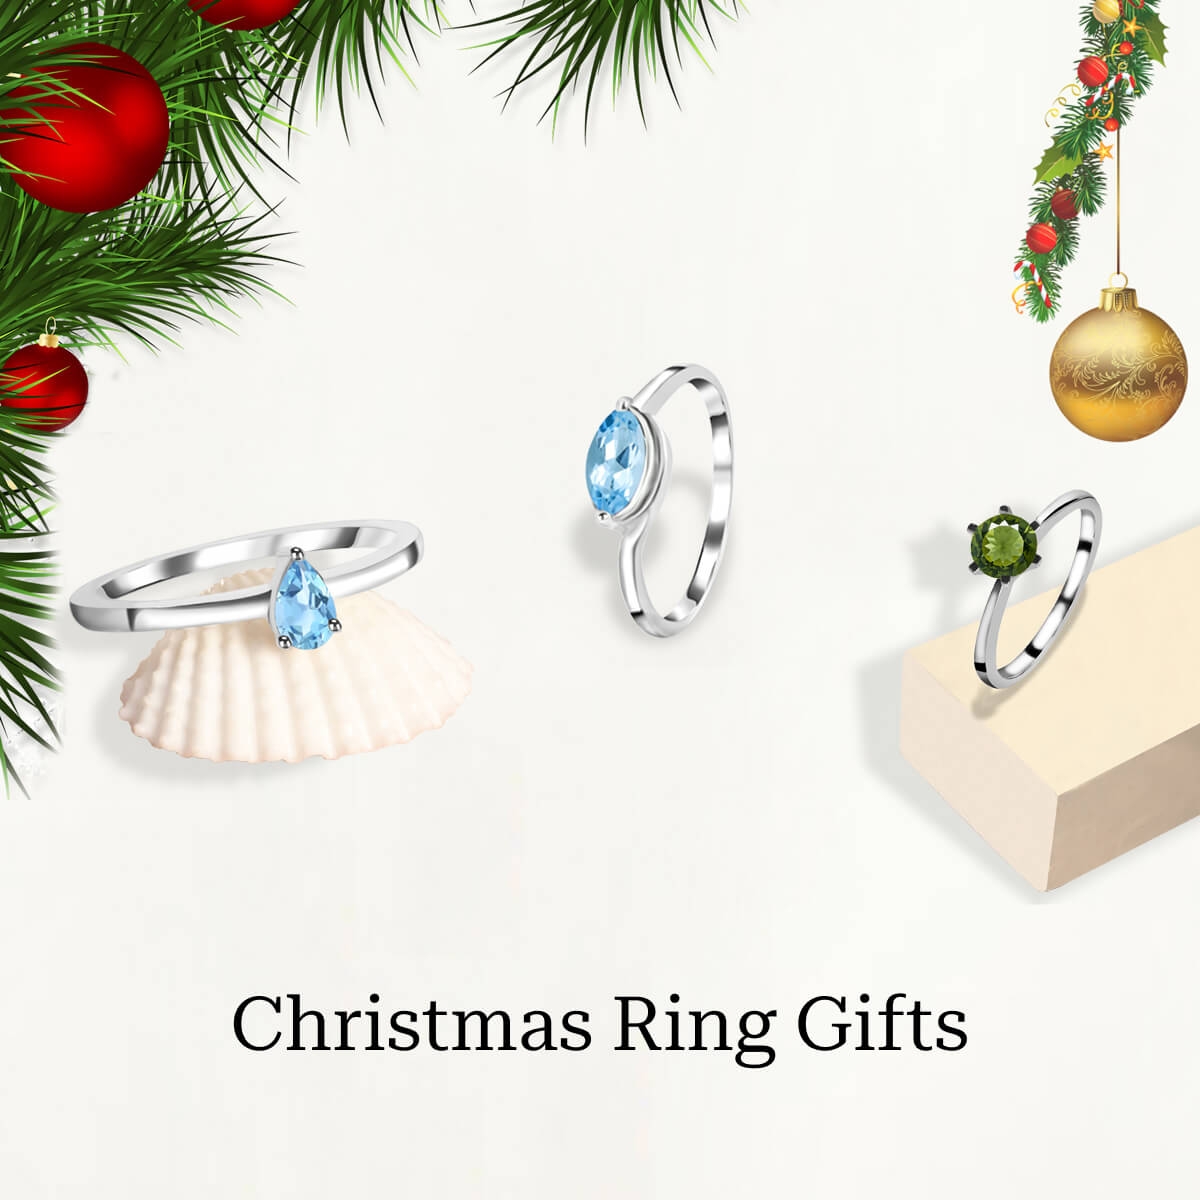 Christmas Ring Gifts for Your Special Ones